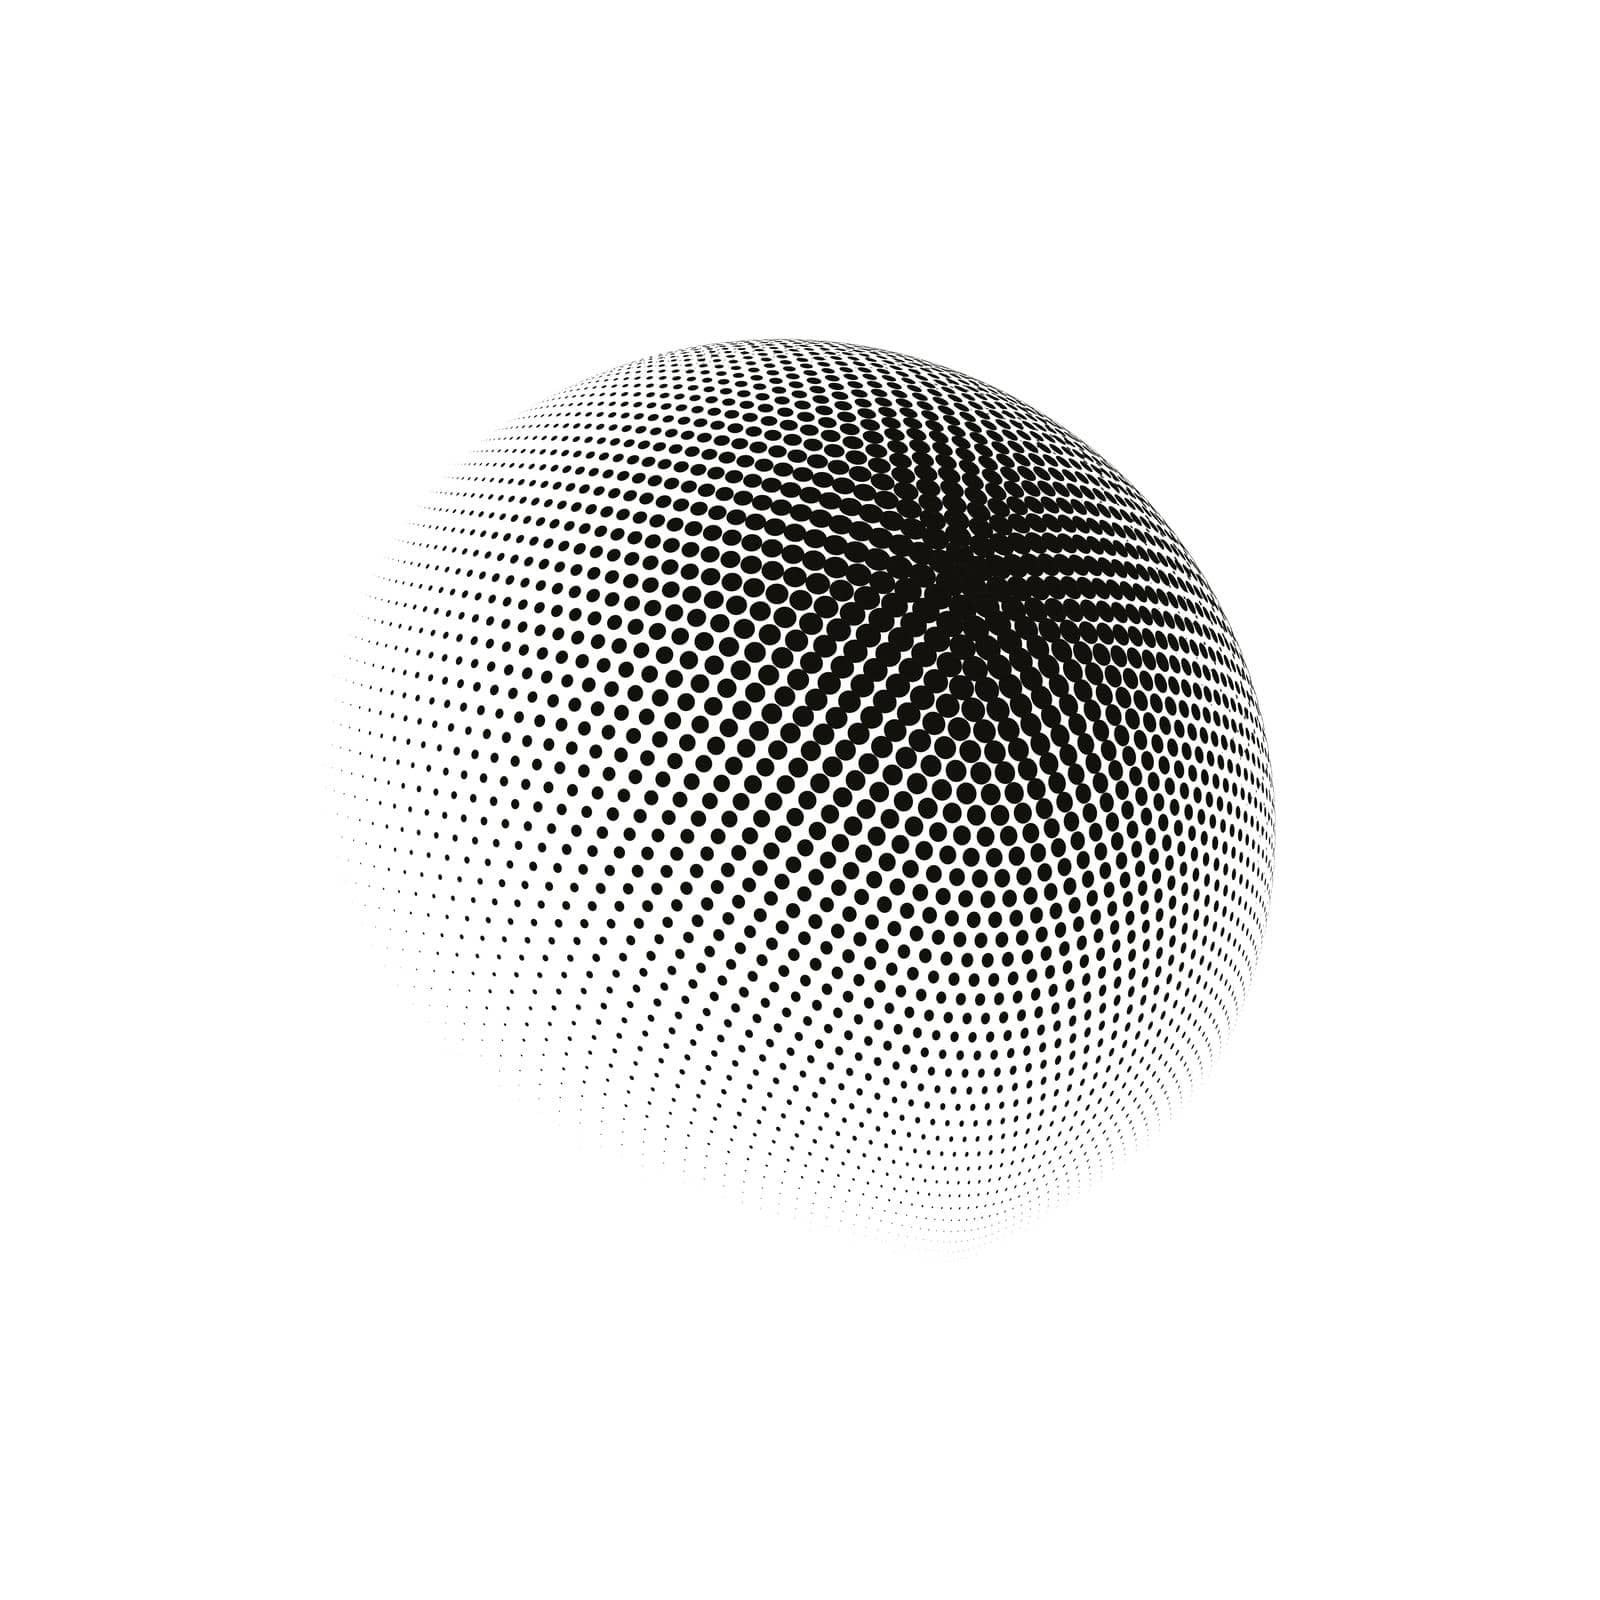 Halftone sphere dotted vector illustration. Circle halftone patterns dots logo.